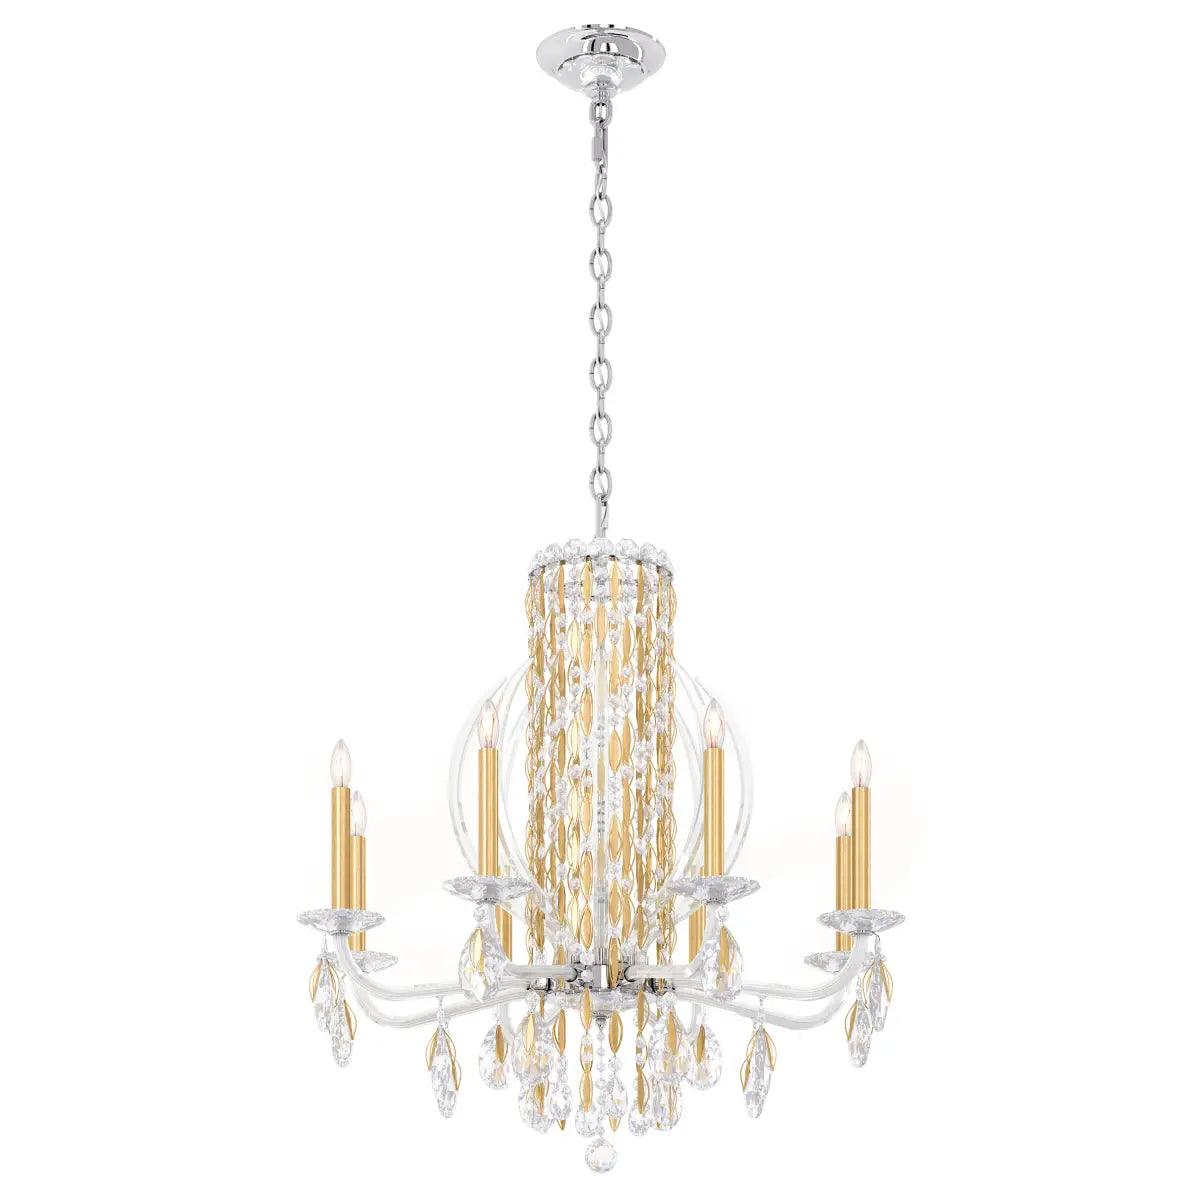 Sarella 8 Light Heirloom Gold Chandelier with Clear Heritage Crystals - Bees Lighting